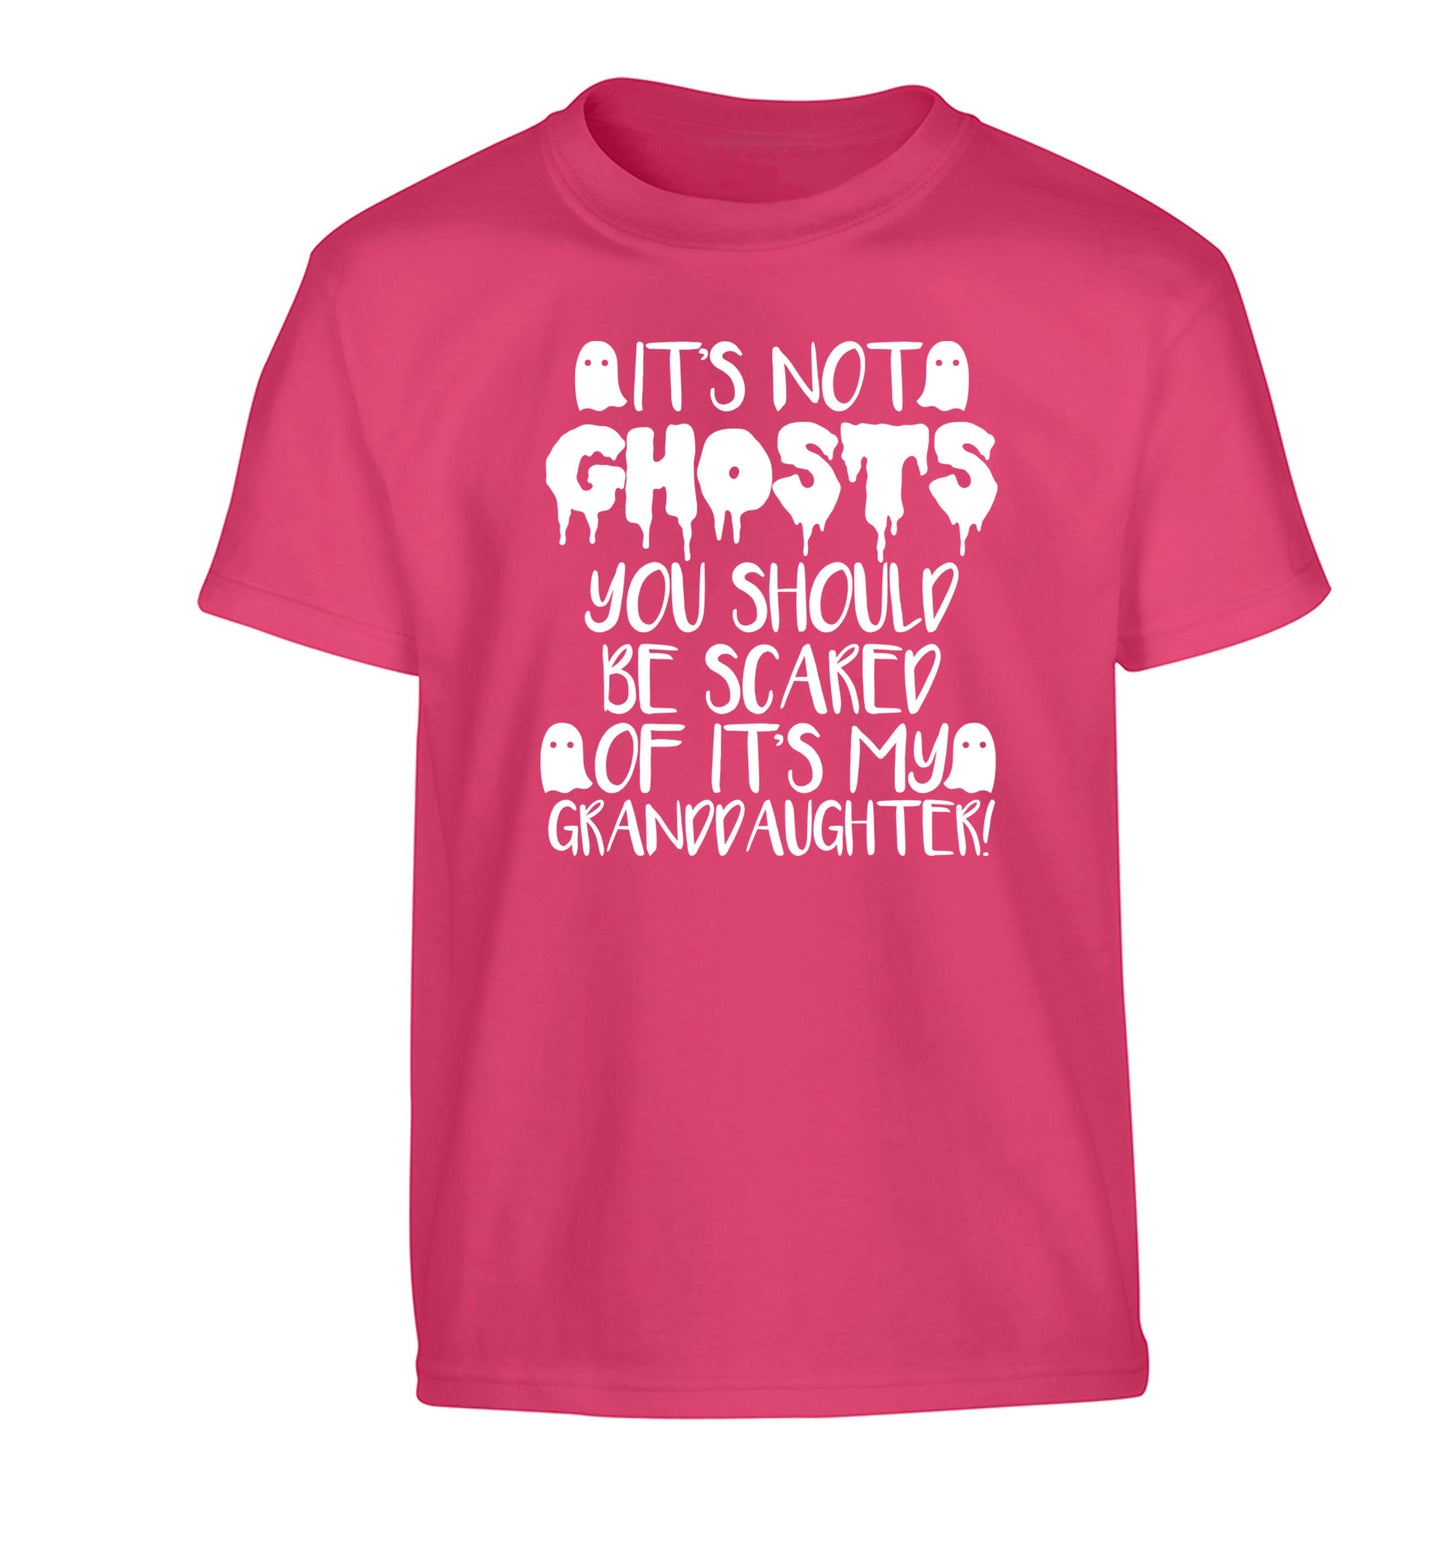 It's not ghosts you should be scared of it's my granddaughter! Children's pink Tshirt 12-14 Years